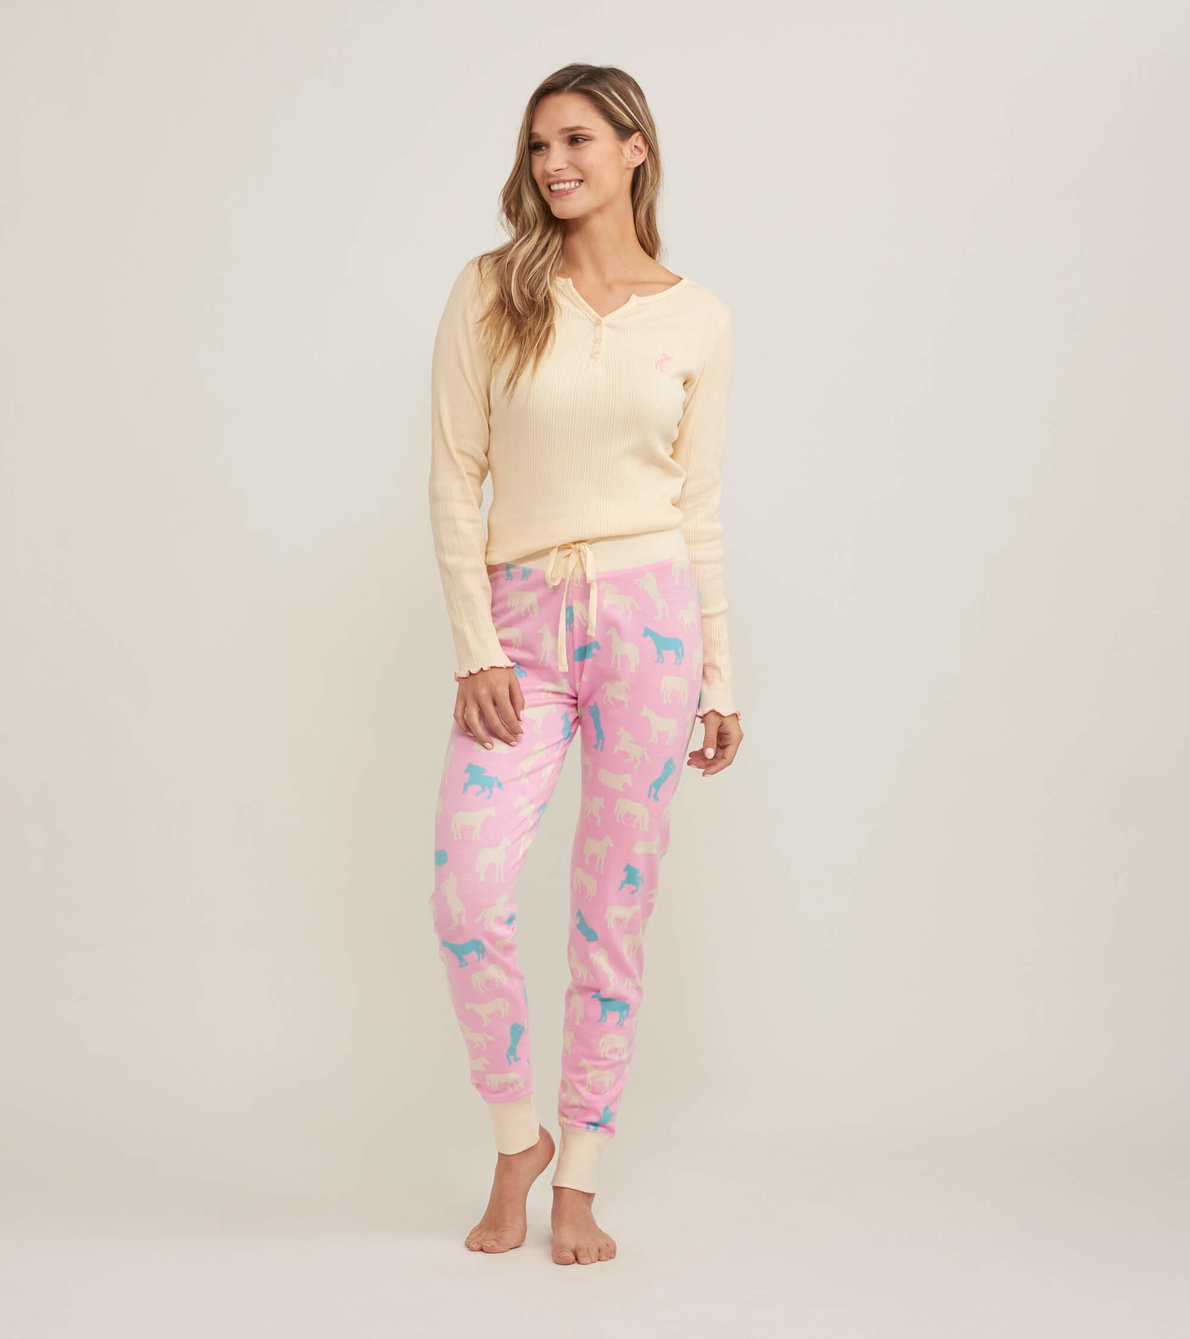 View larger image of Horse Silhouettes Women's Tee and Leggings Pajama Separates